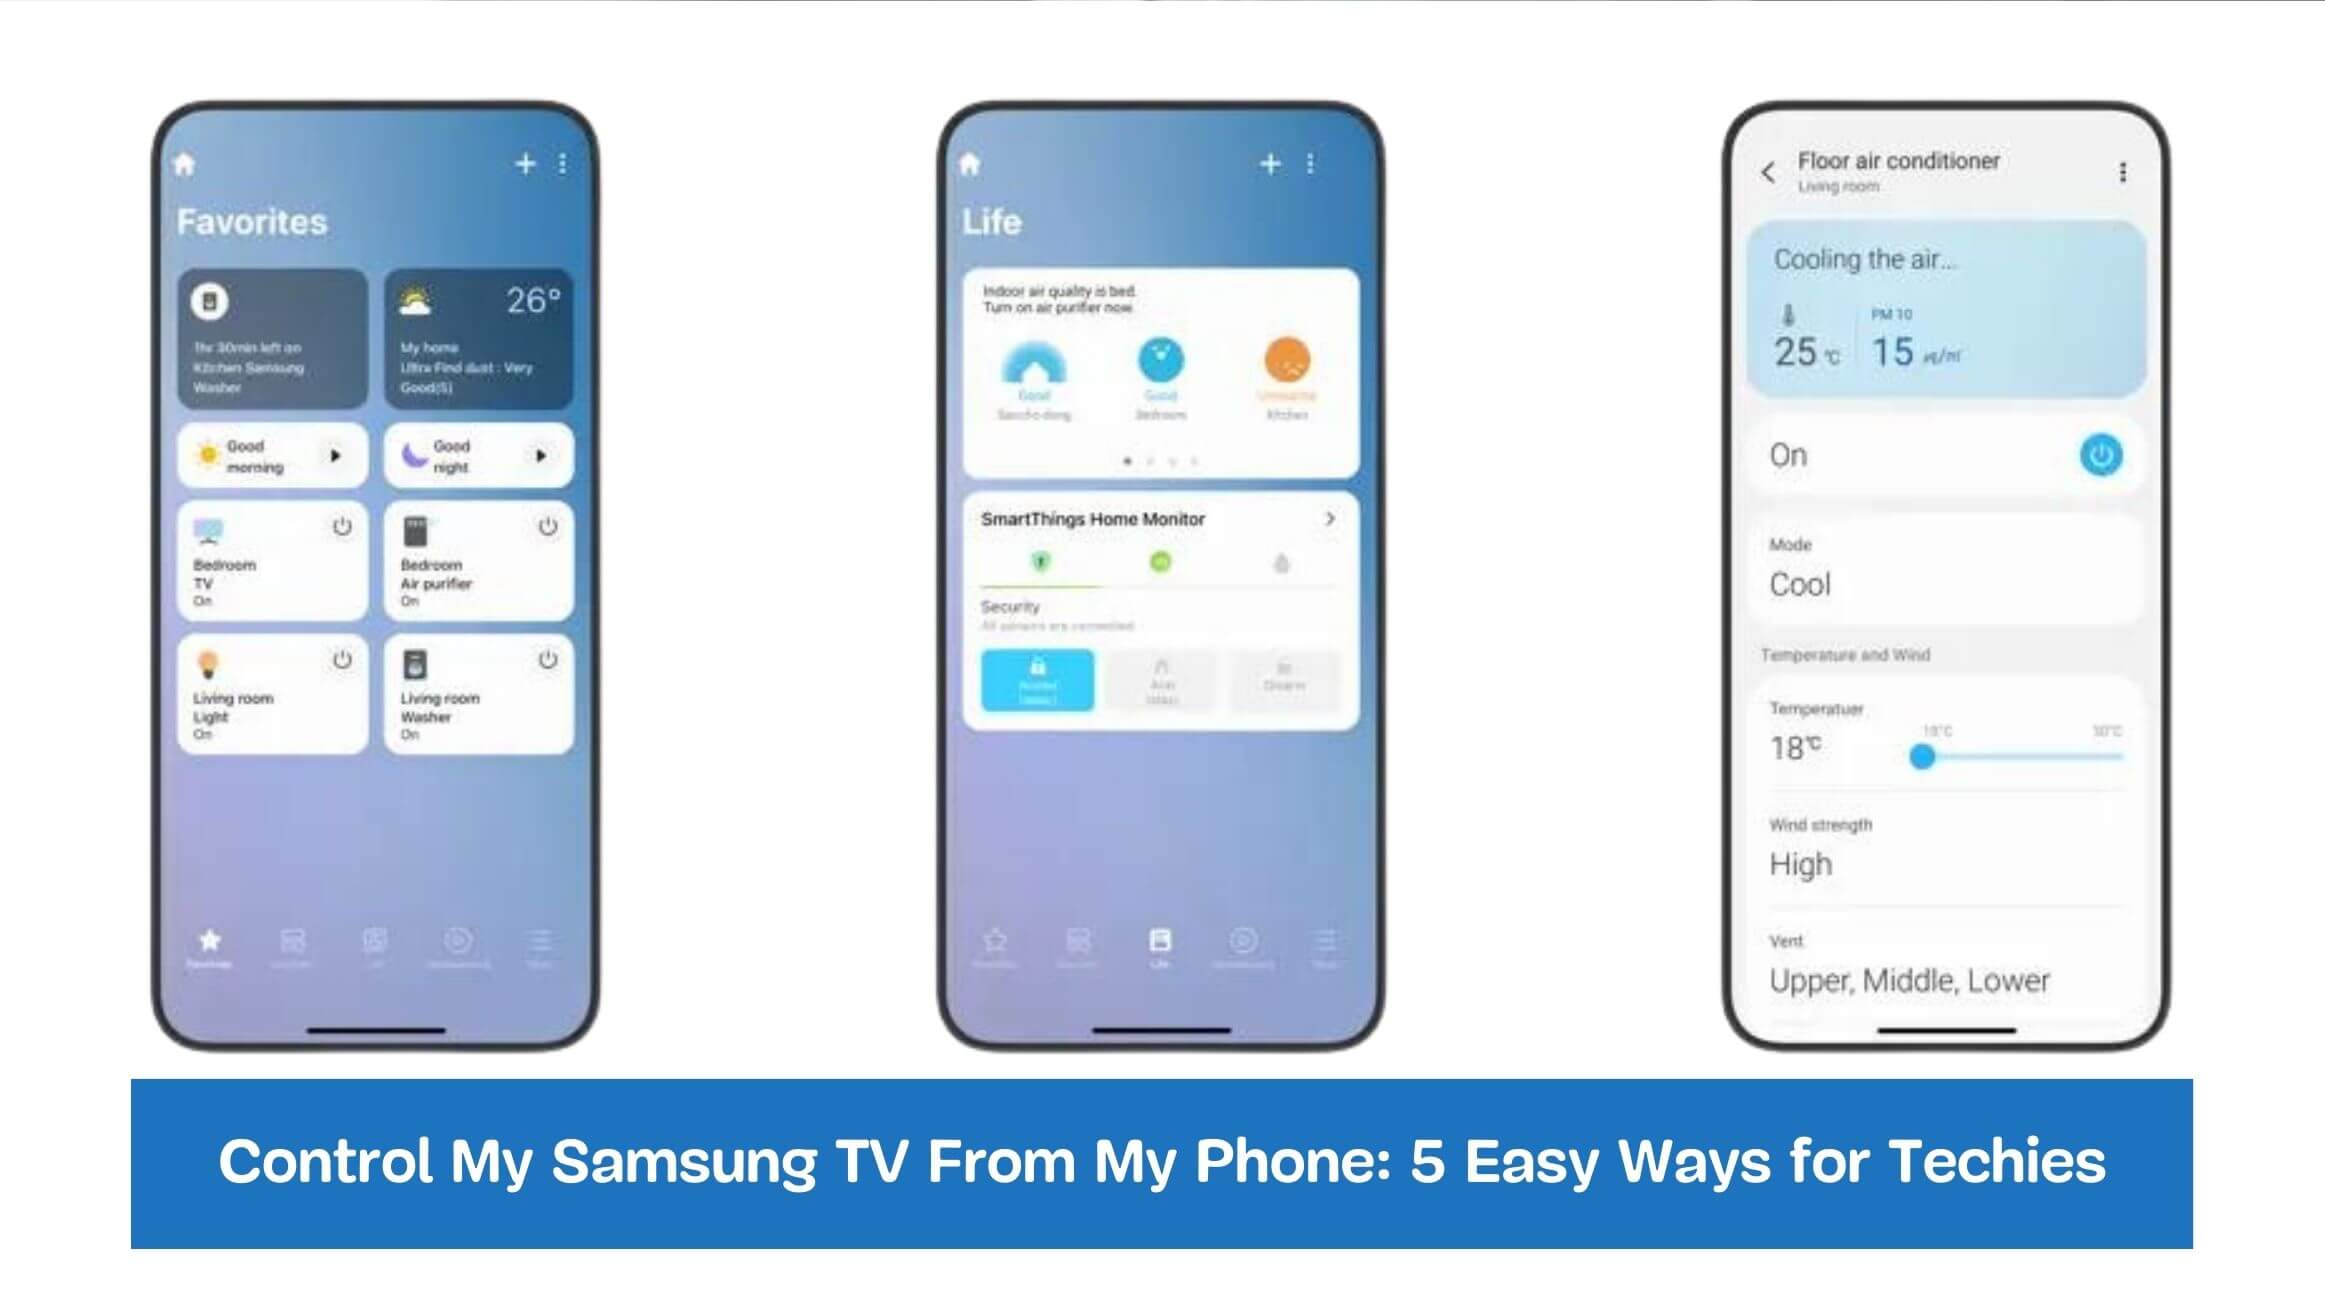 Control My Samsung TV From My Phone: 5 Easy Ways for Techies